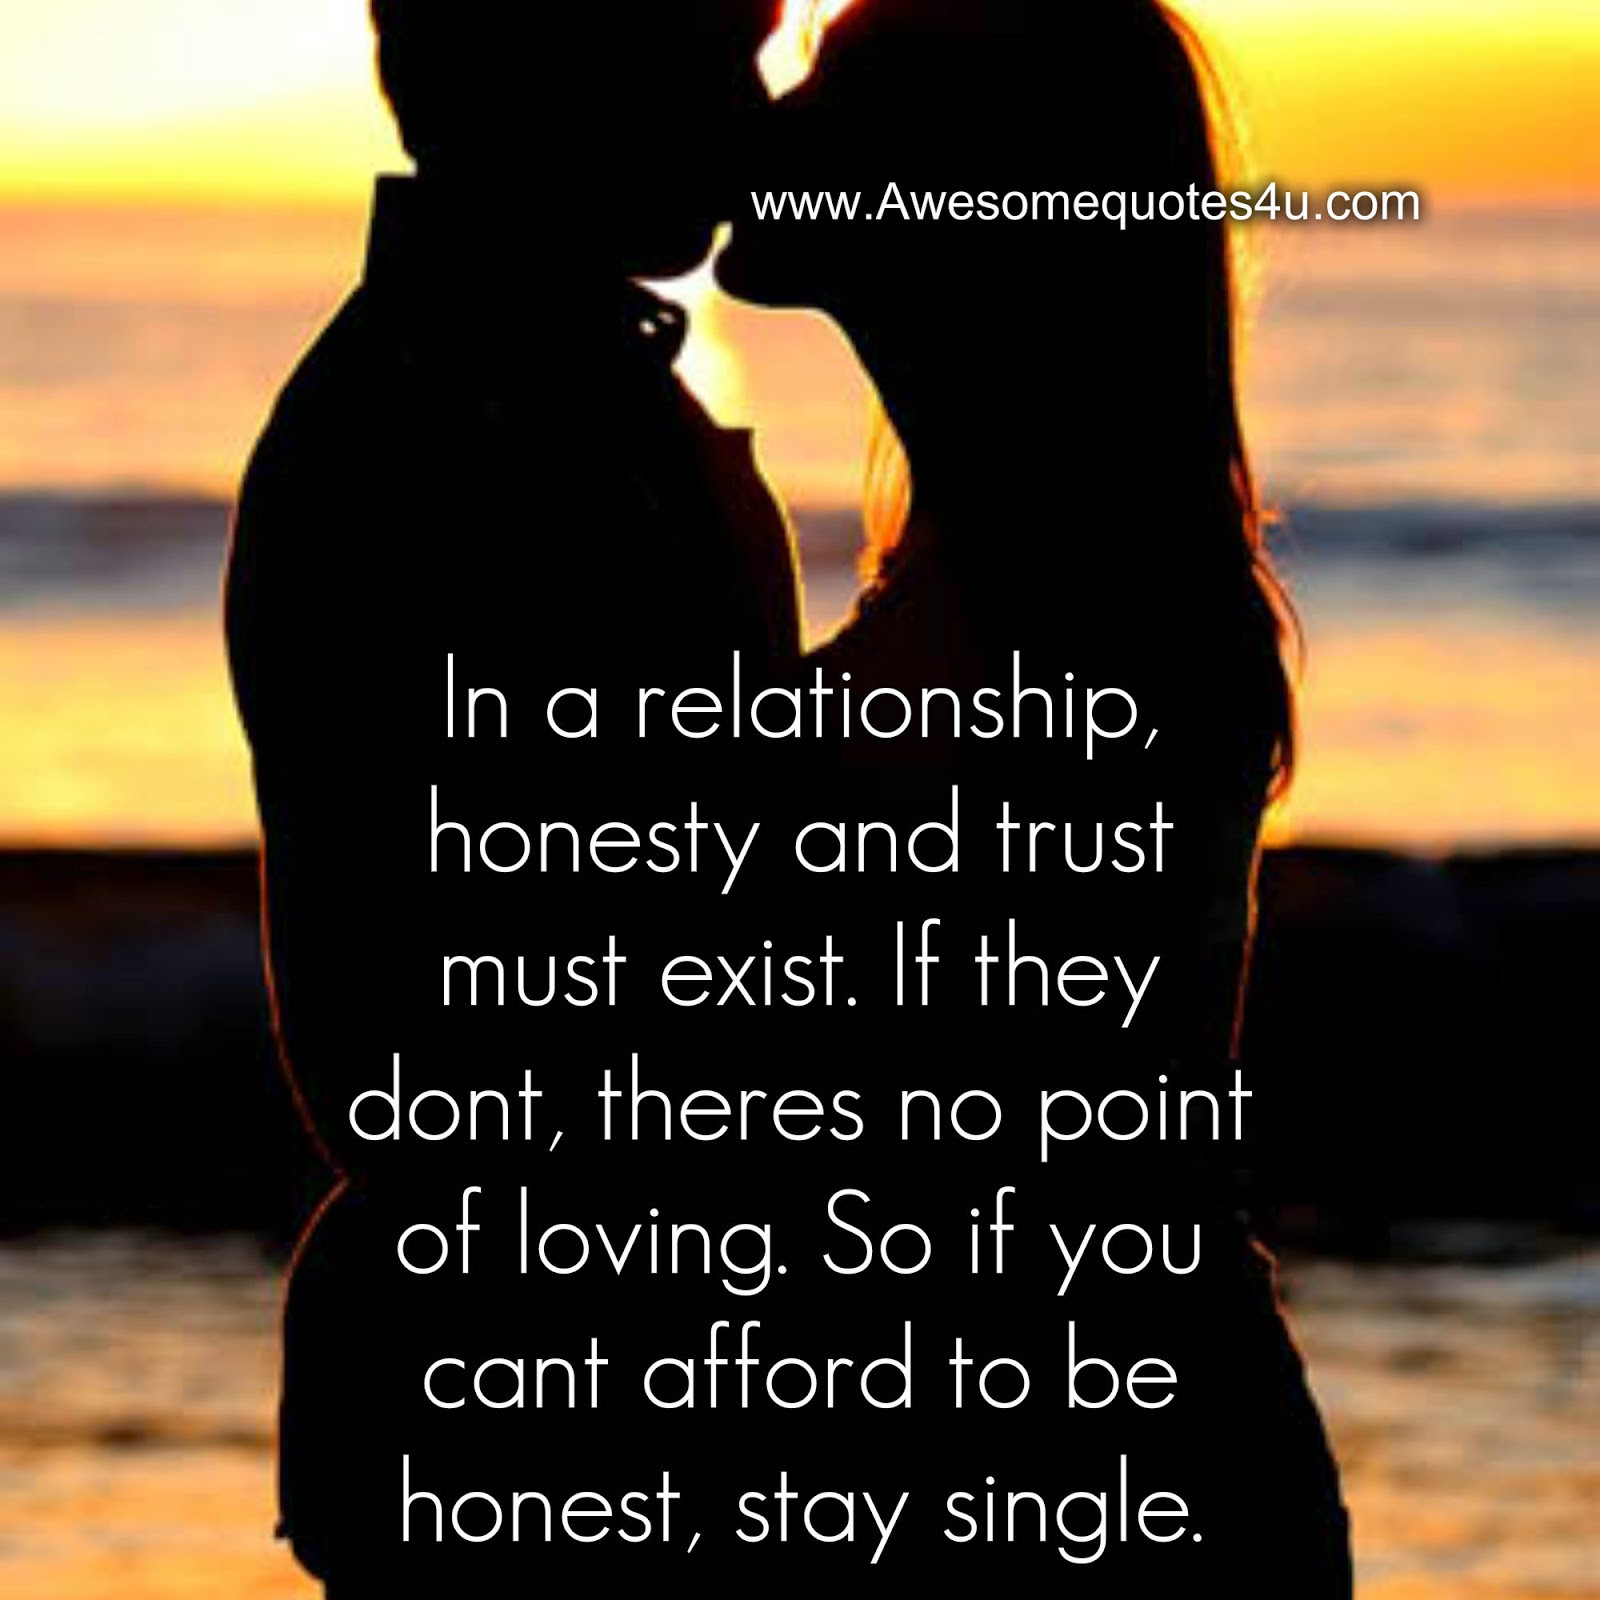 Quotes About Honesty In Relationships
 Awesome Quotes Stay Honest In A Relationship